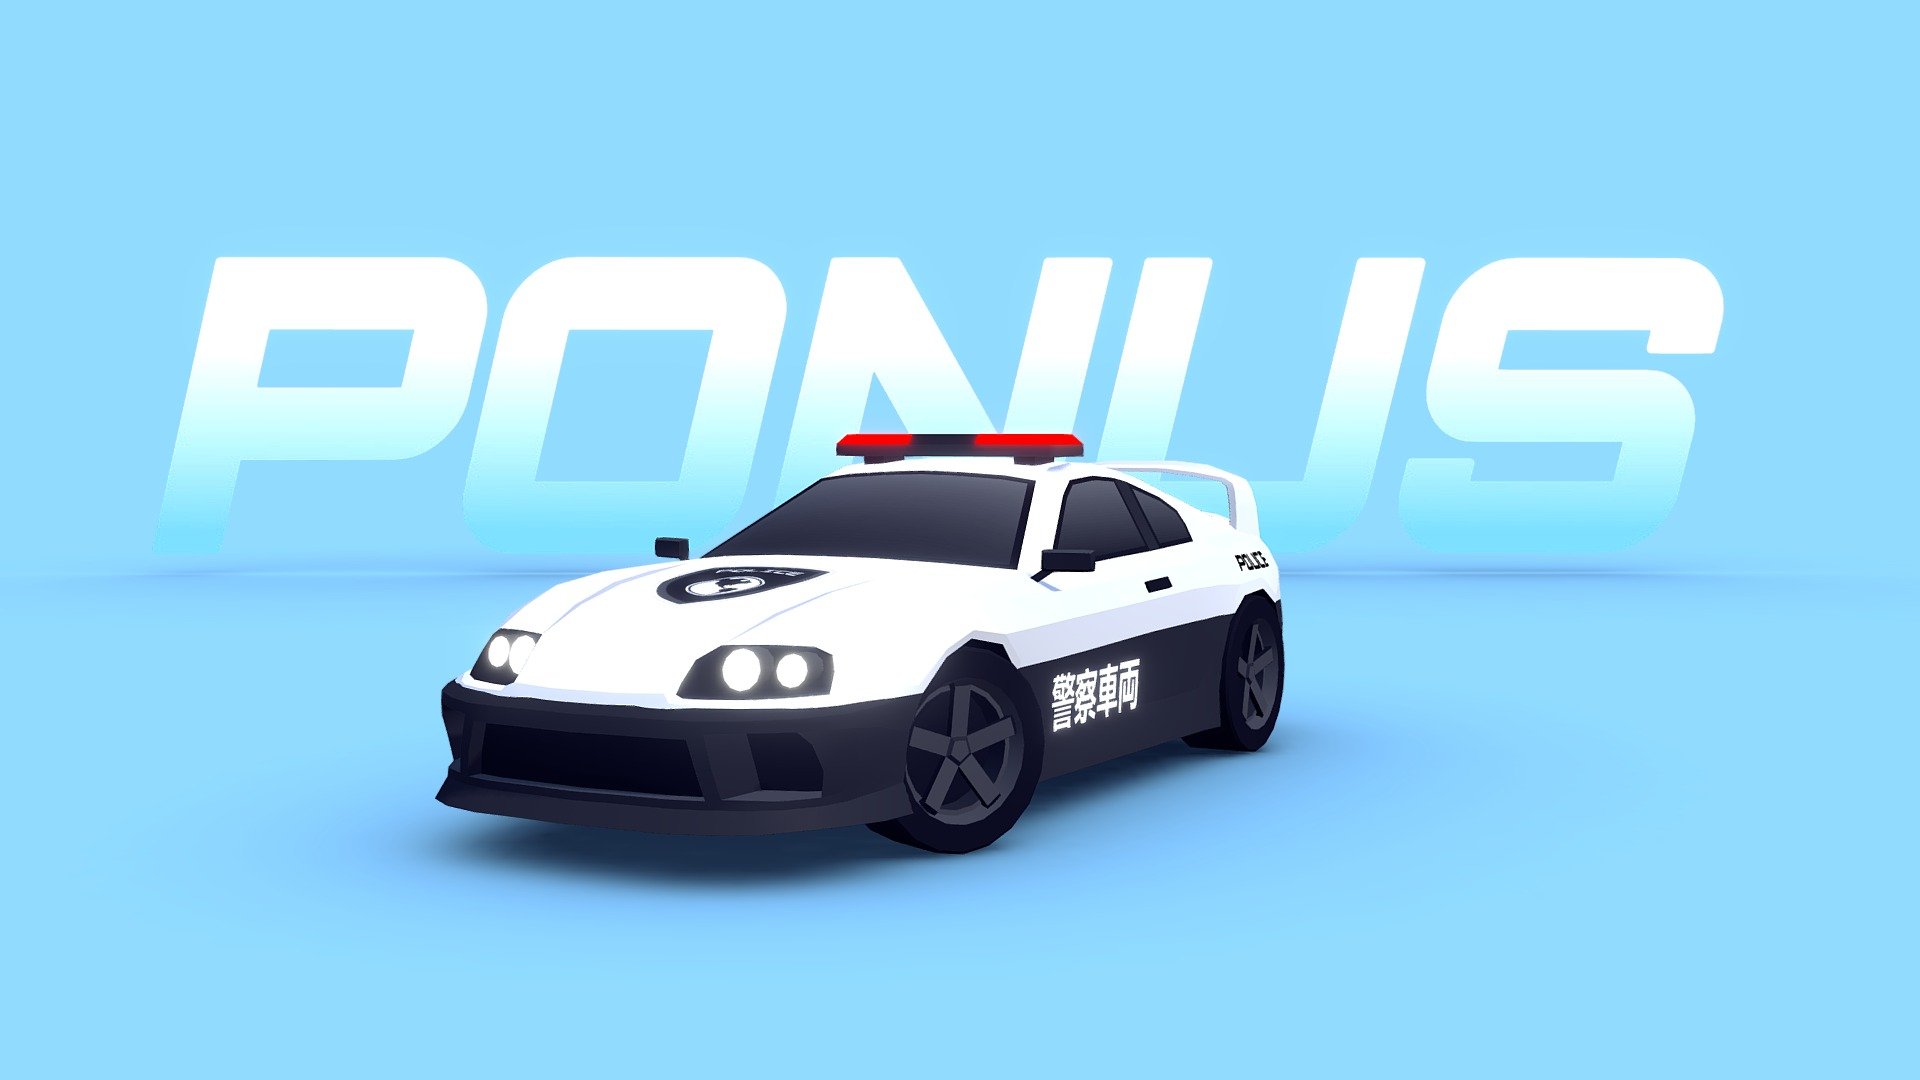 A few days ago I watched a video and I saw a very cool supra police, so I had to try to make one: this is the result. However, I'm not sure if I should add this to the Ultimate Pack or leave in the vault. What do you think? - ARCADE: "Ponus" Police Car - 3D model by Mena (@MenaStudios) 3d model